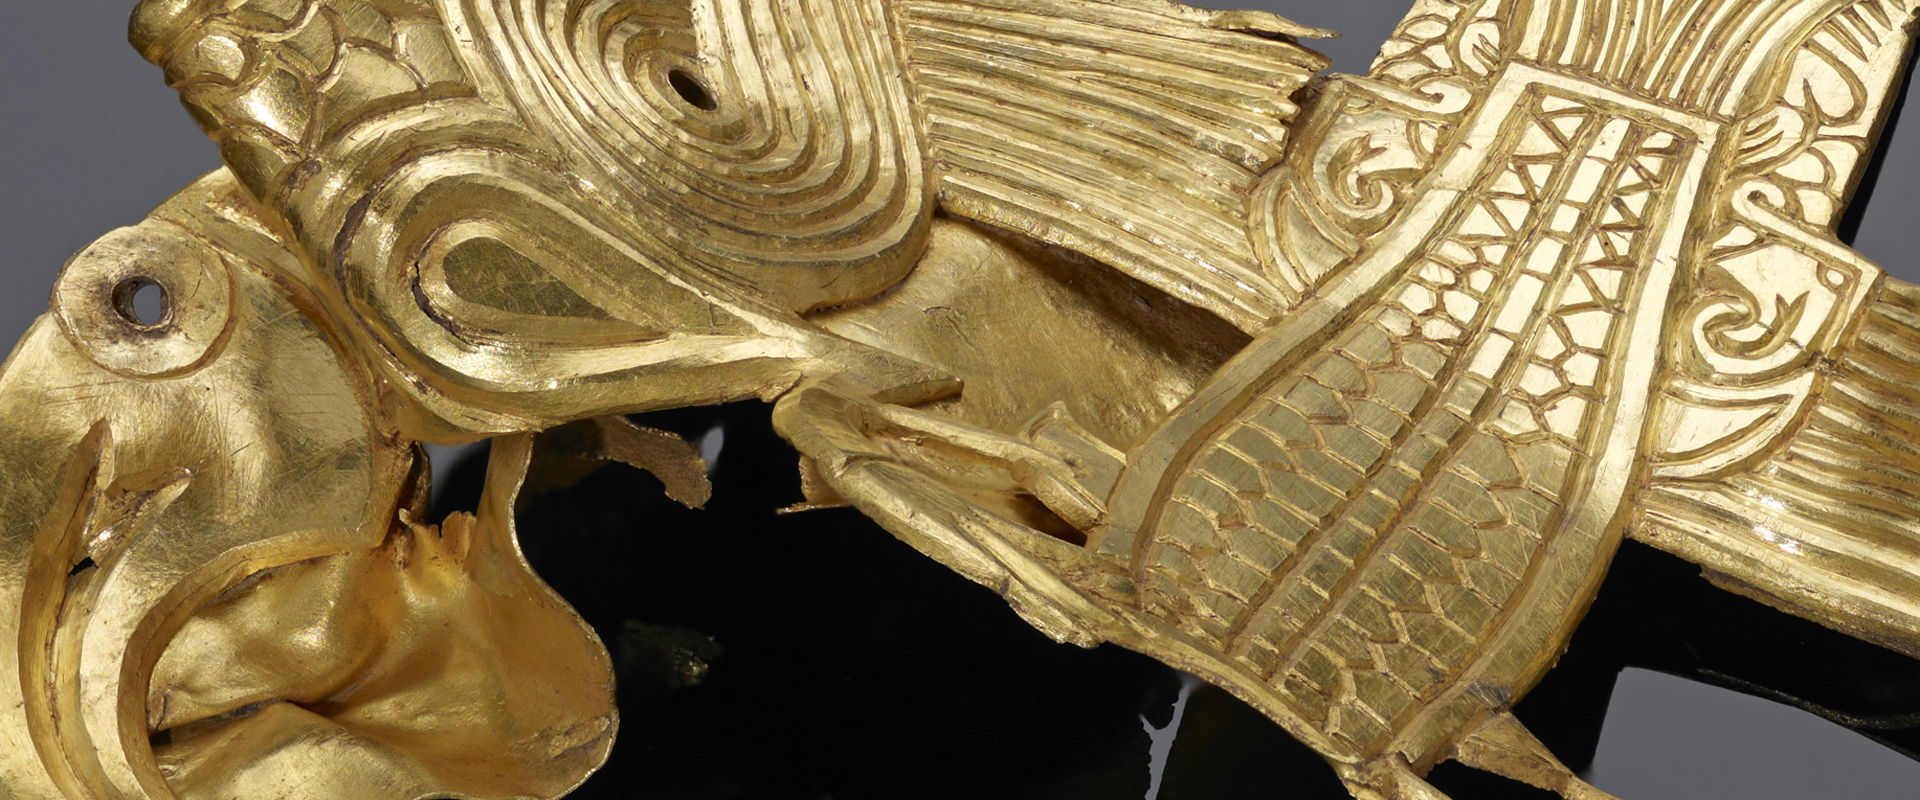 Detail of an artefact from the Staffordshire Hoard.